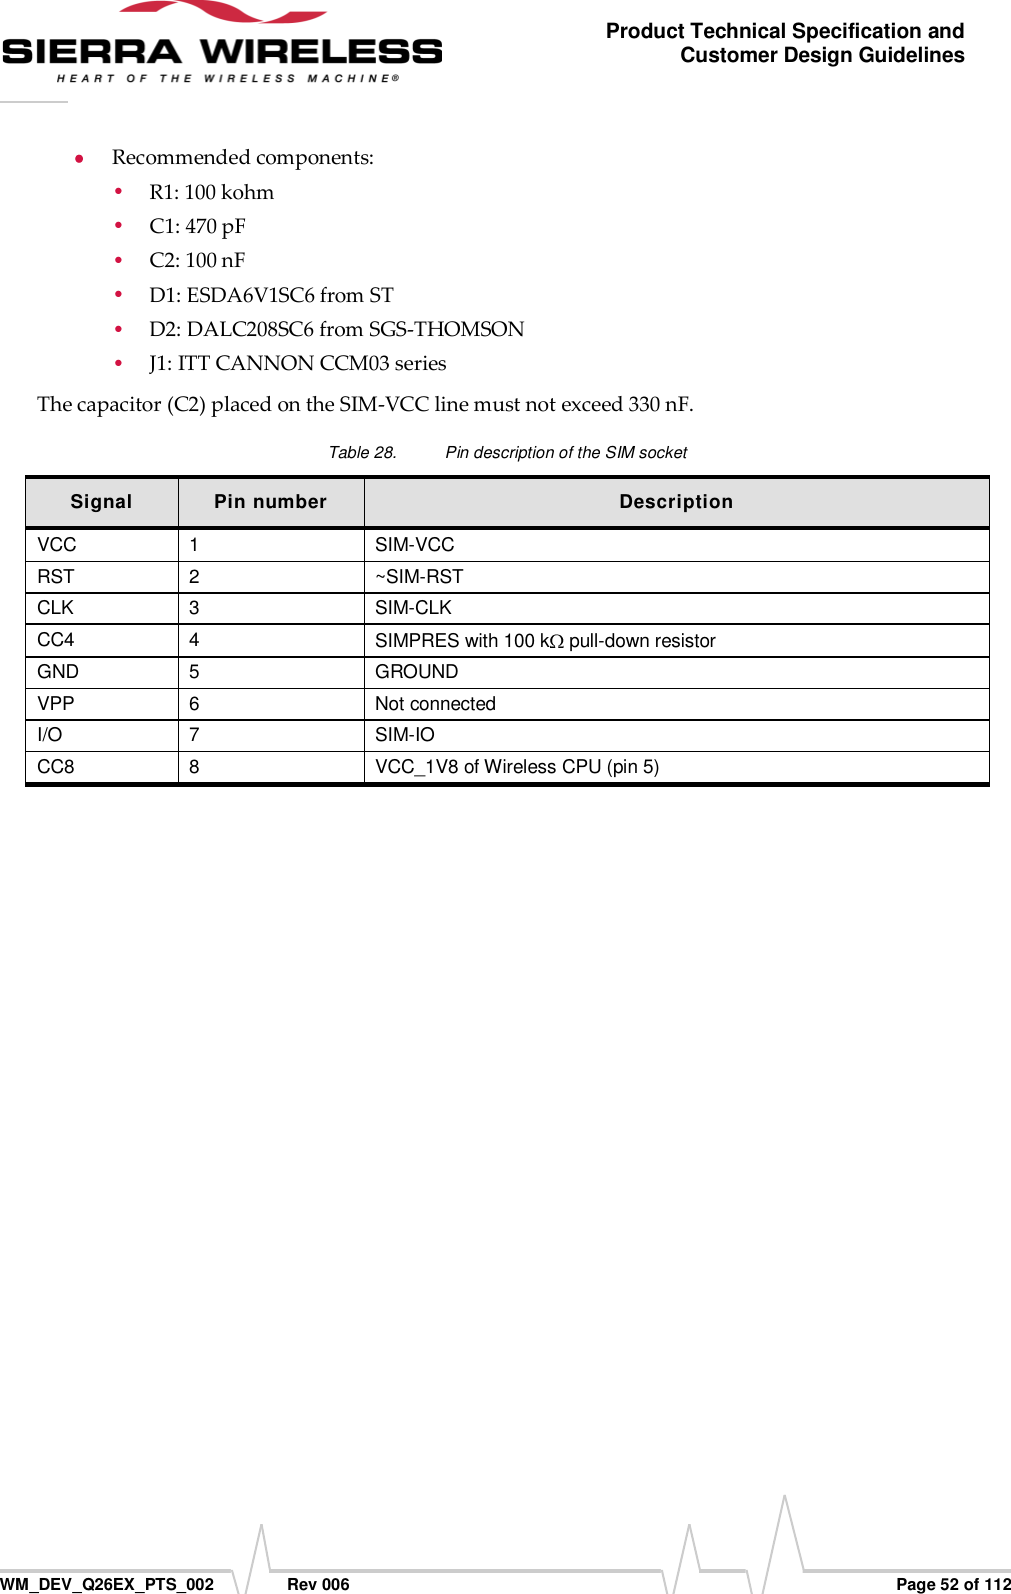      WM_DEV_Q26EX_PTS_002  Rev 006  Page 52 of 112 Product Technical Specification and Customer Design Guidelines  Recommended components:  R1: 100 kohm  C1: 470 pF  C2: 100 nF  D1: ESDA6V1SC6 from ST  D2: DALC208SC6 from SGS-THOMSON  J1: ITT CANNON CCM03 series  The capacitor (C2) placed on the SIM-VCC line must not exceed 330 nF. Table 28.  Pin description of the SIM socket Signal Pin number Description VCC 1 SIM-VCC RST 2 ~SIM-RST CLK 3 SIM-CLK CC4 4 SIMPRES with 100 k  pull-down resistor GND 5 GROUND VPP 6 Not connected I/O 7 SIM-IO CC8 8 VCC_1V8 of Wireless CPU (pin 5) 